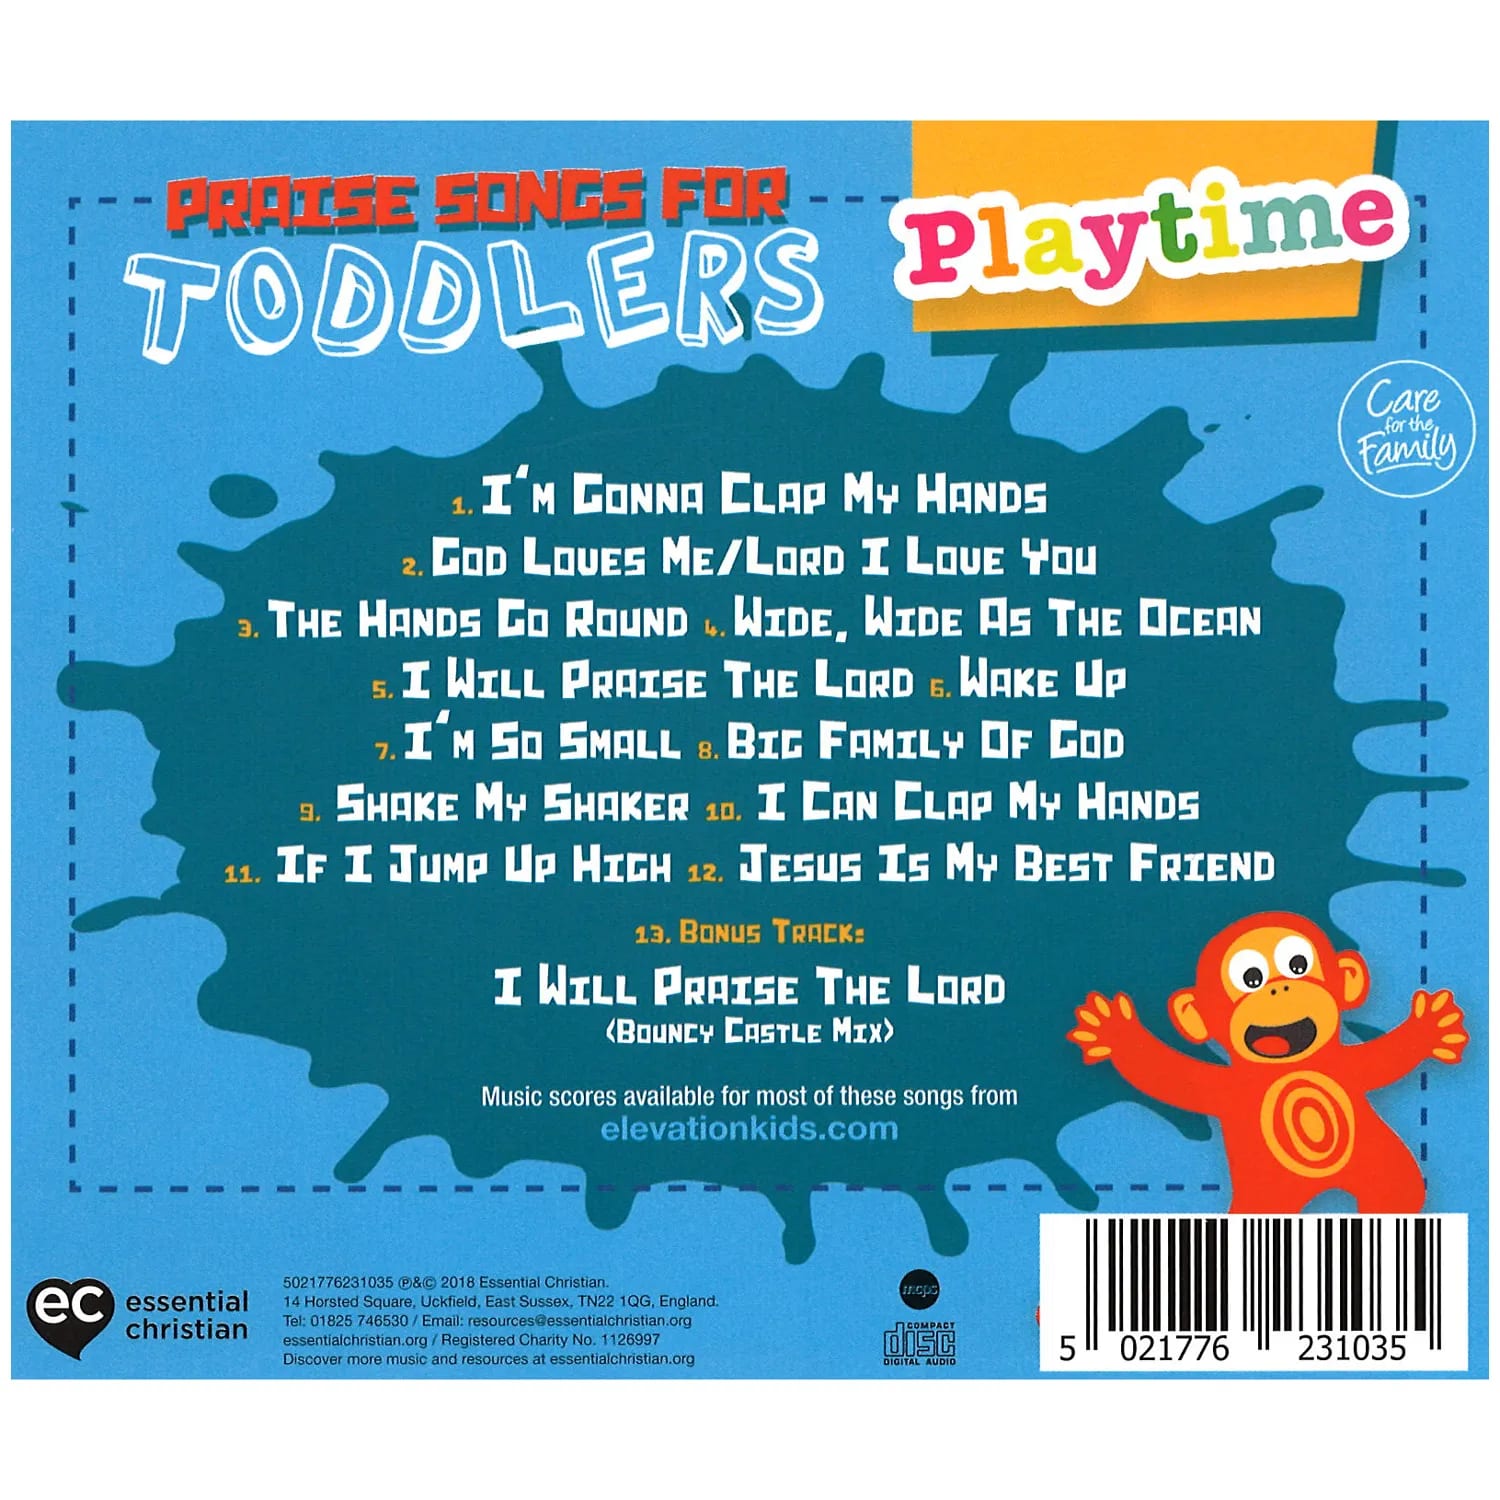 Praise Songs for Toddlers